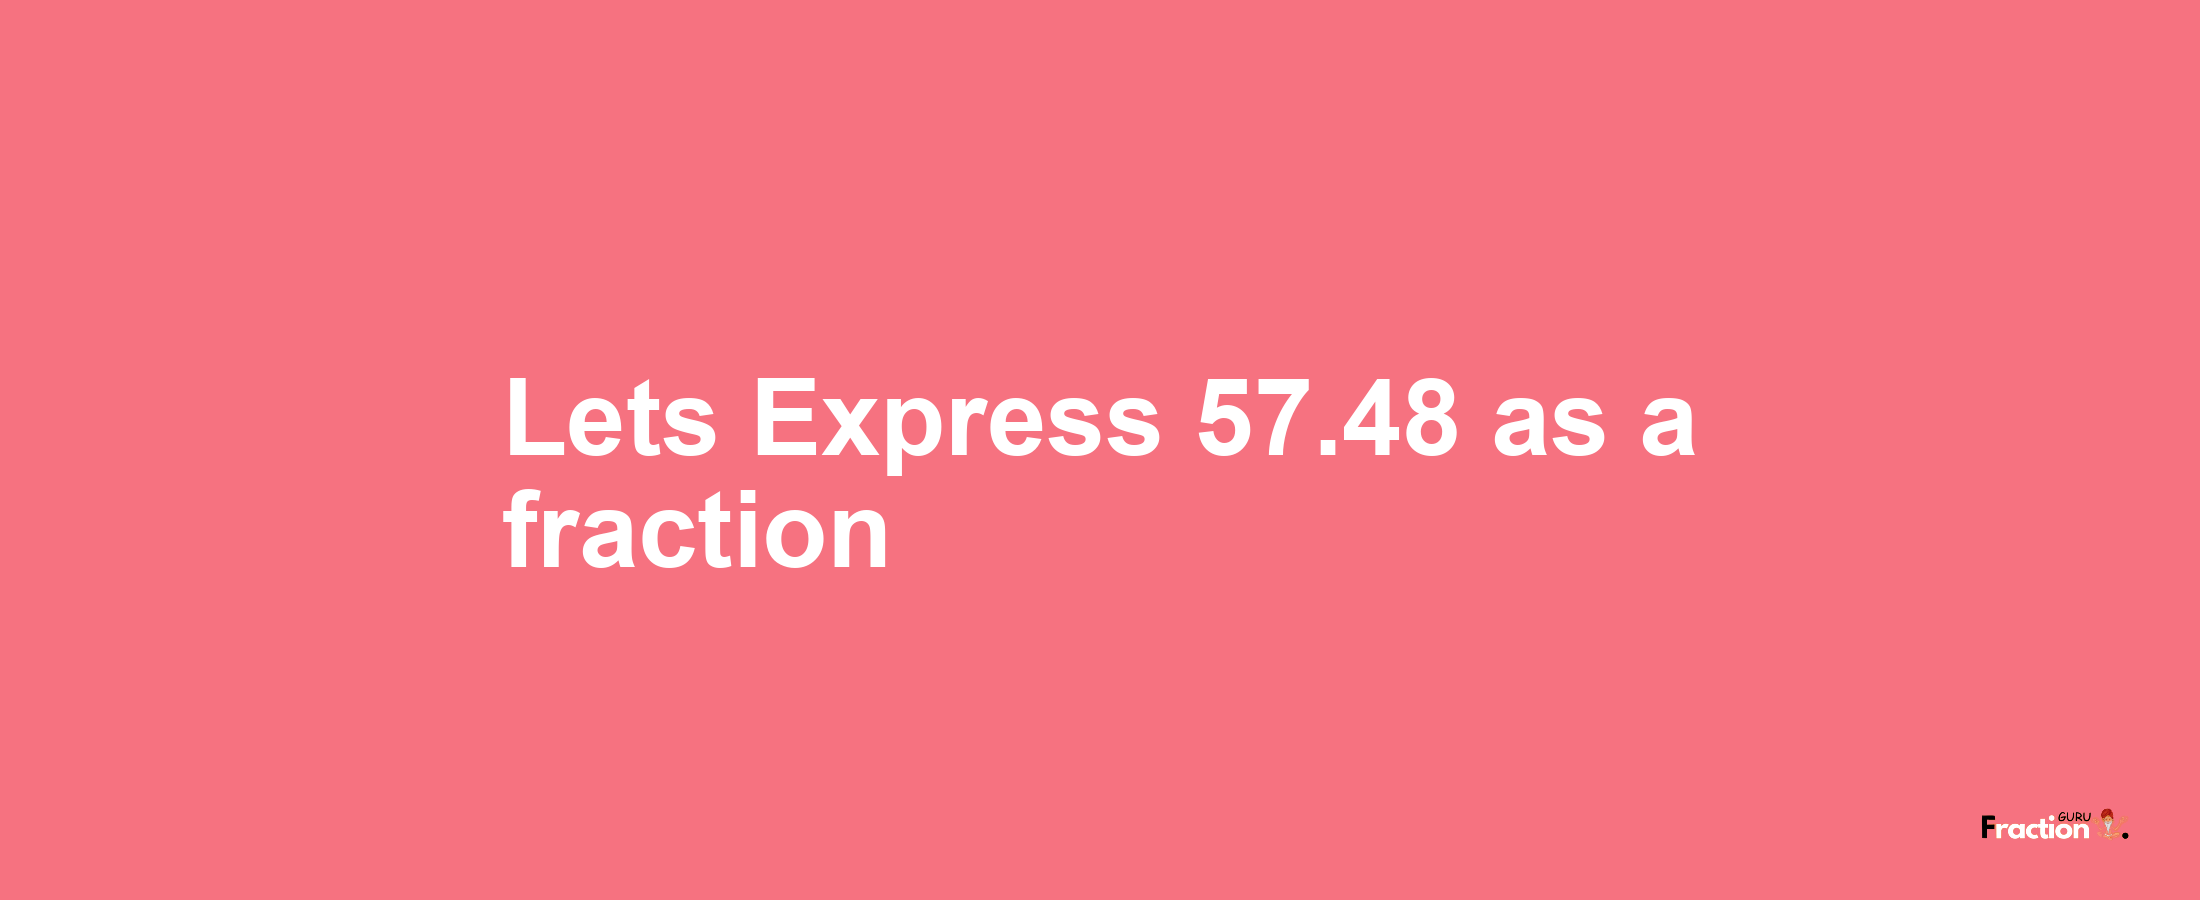 Lets Express 57.48 as afraction